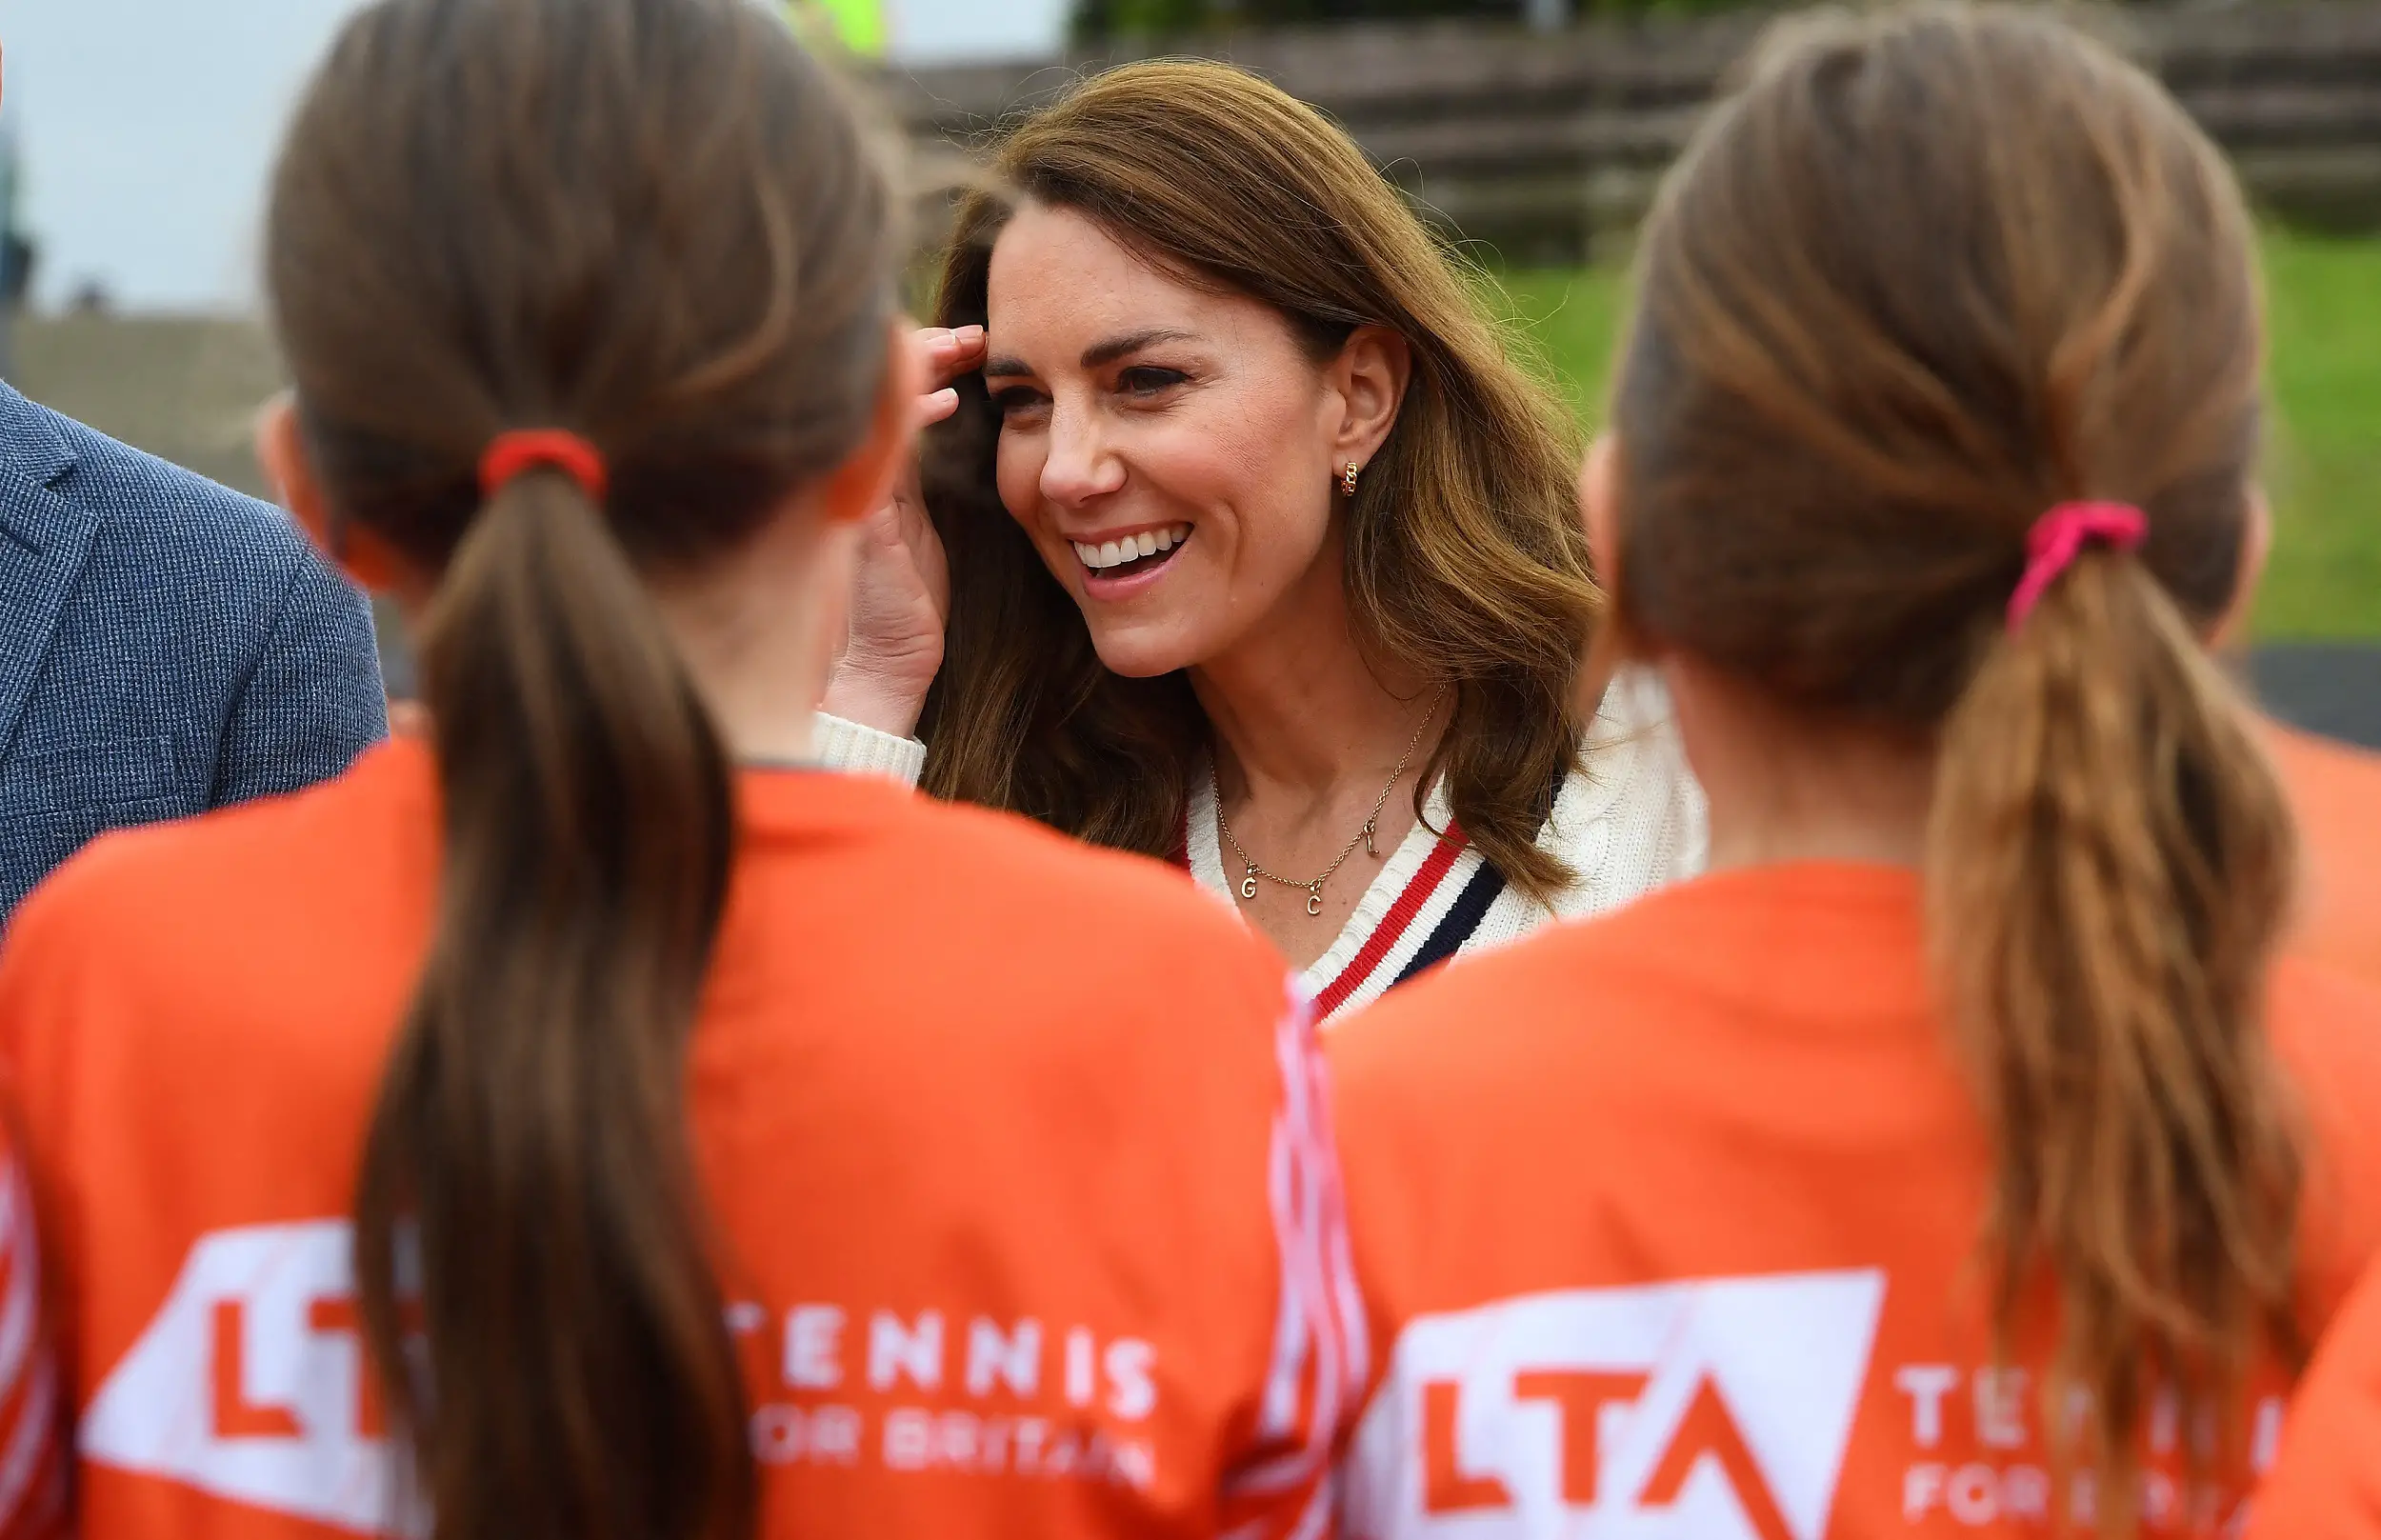 The Duchess of Cambridge became the patron of Lawn Tennis Association in 2016